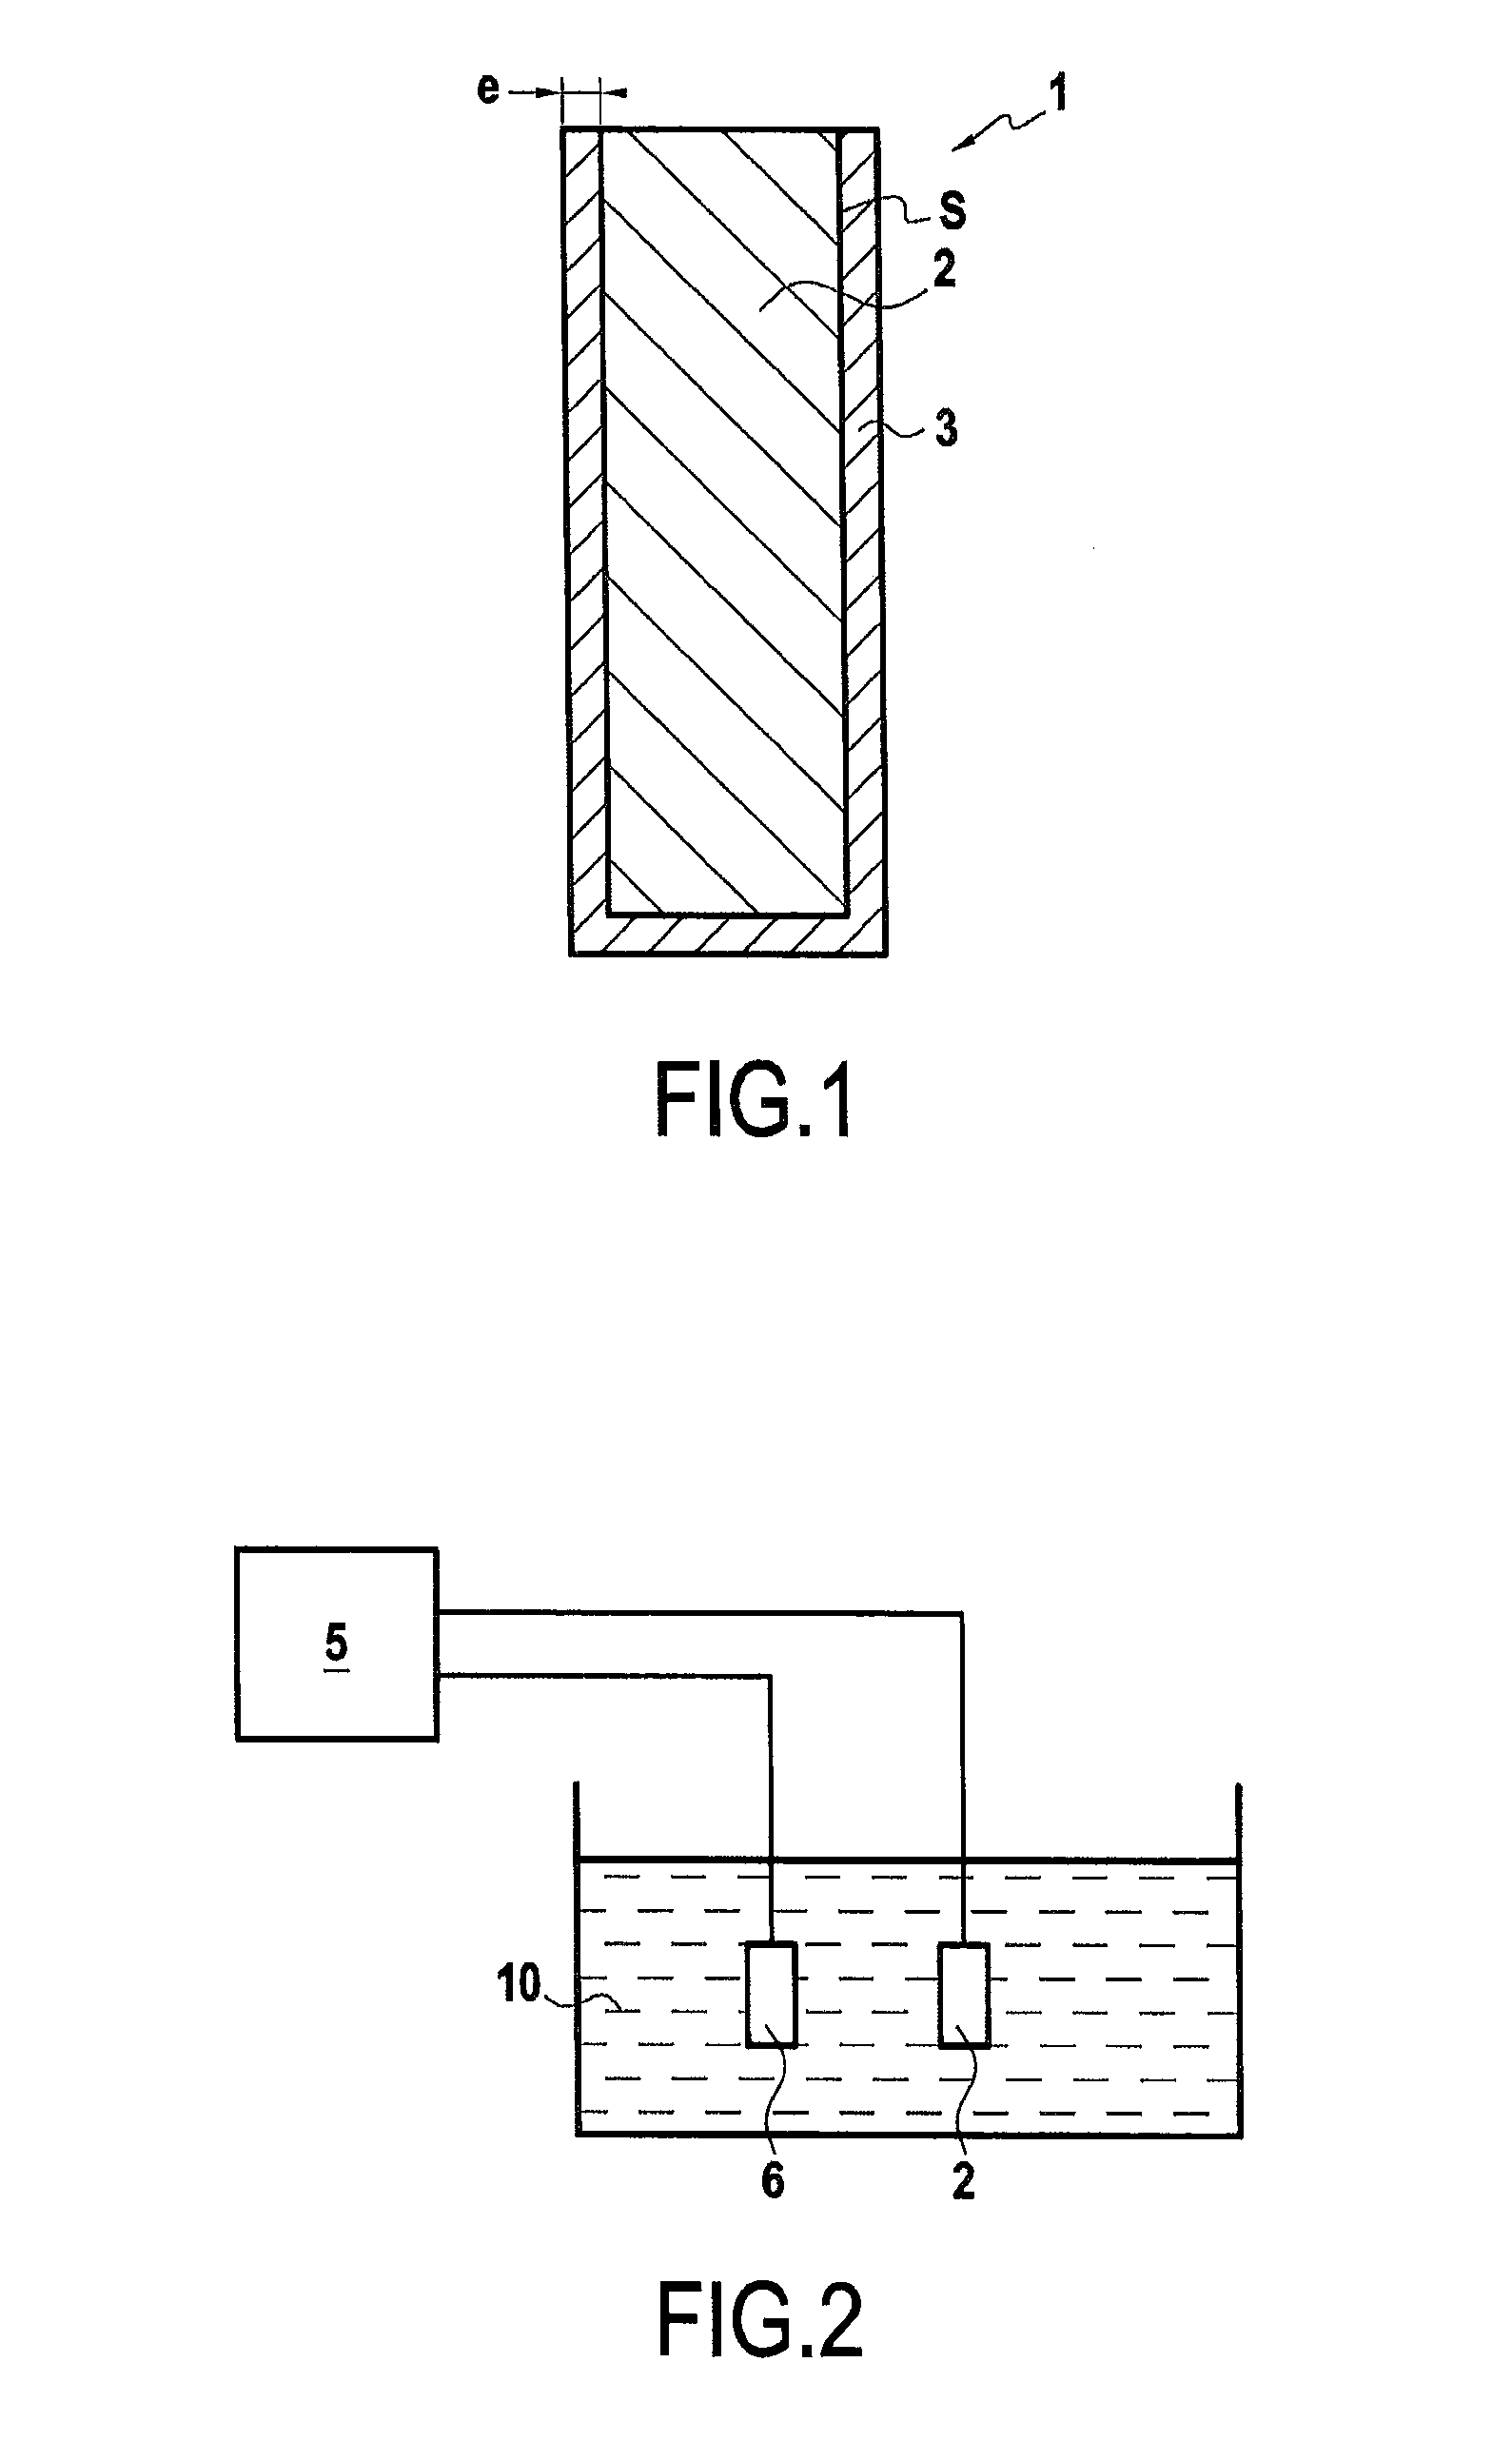 Method for manufacturing a part coated with a protective coating